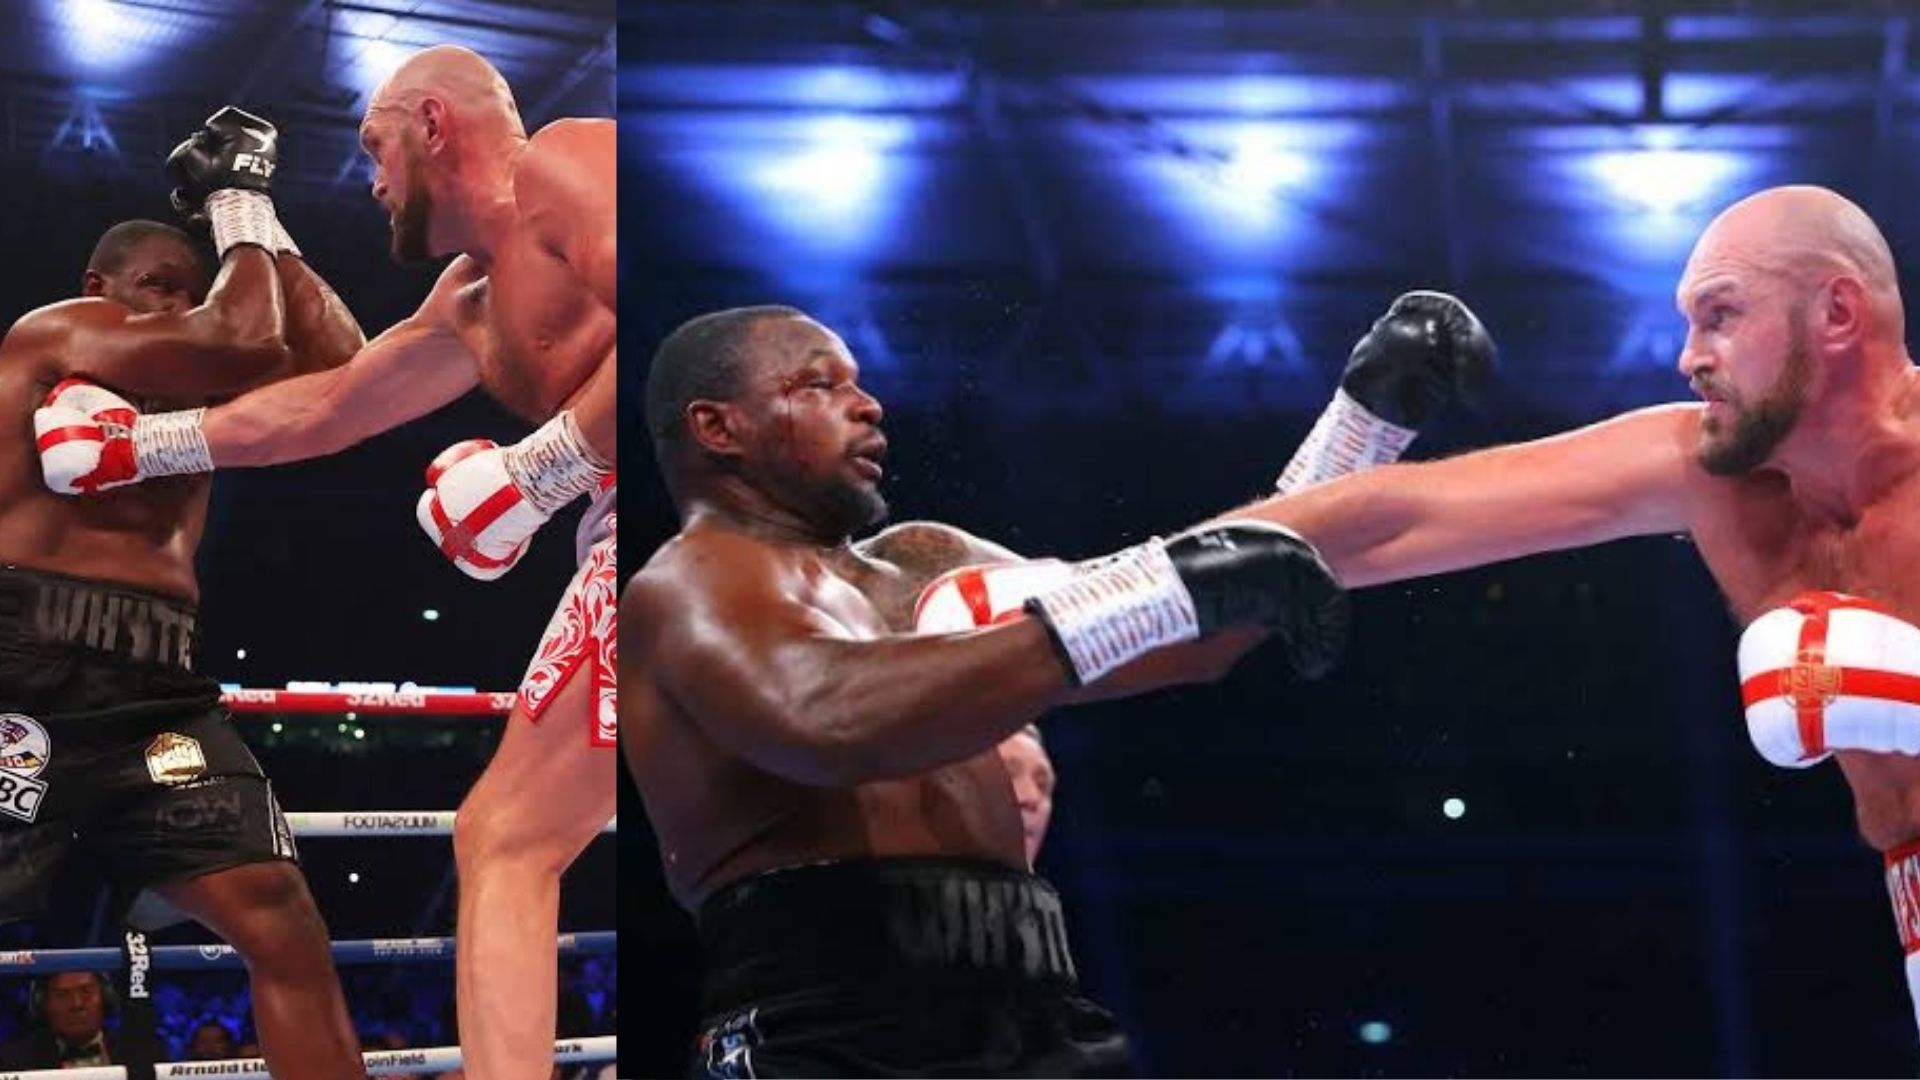 Tyson Fury punches Dillian Whyte